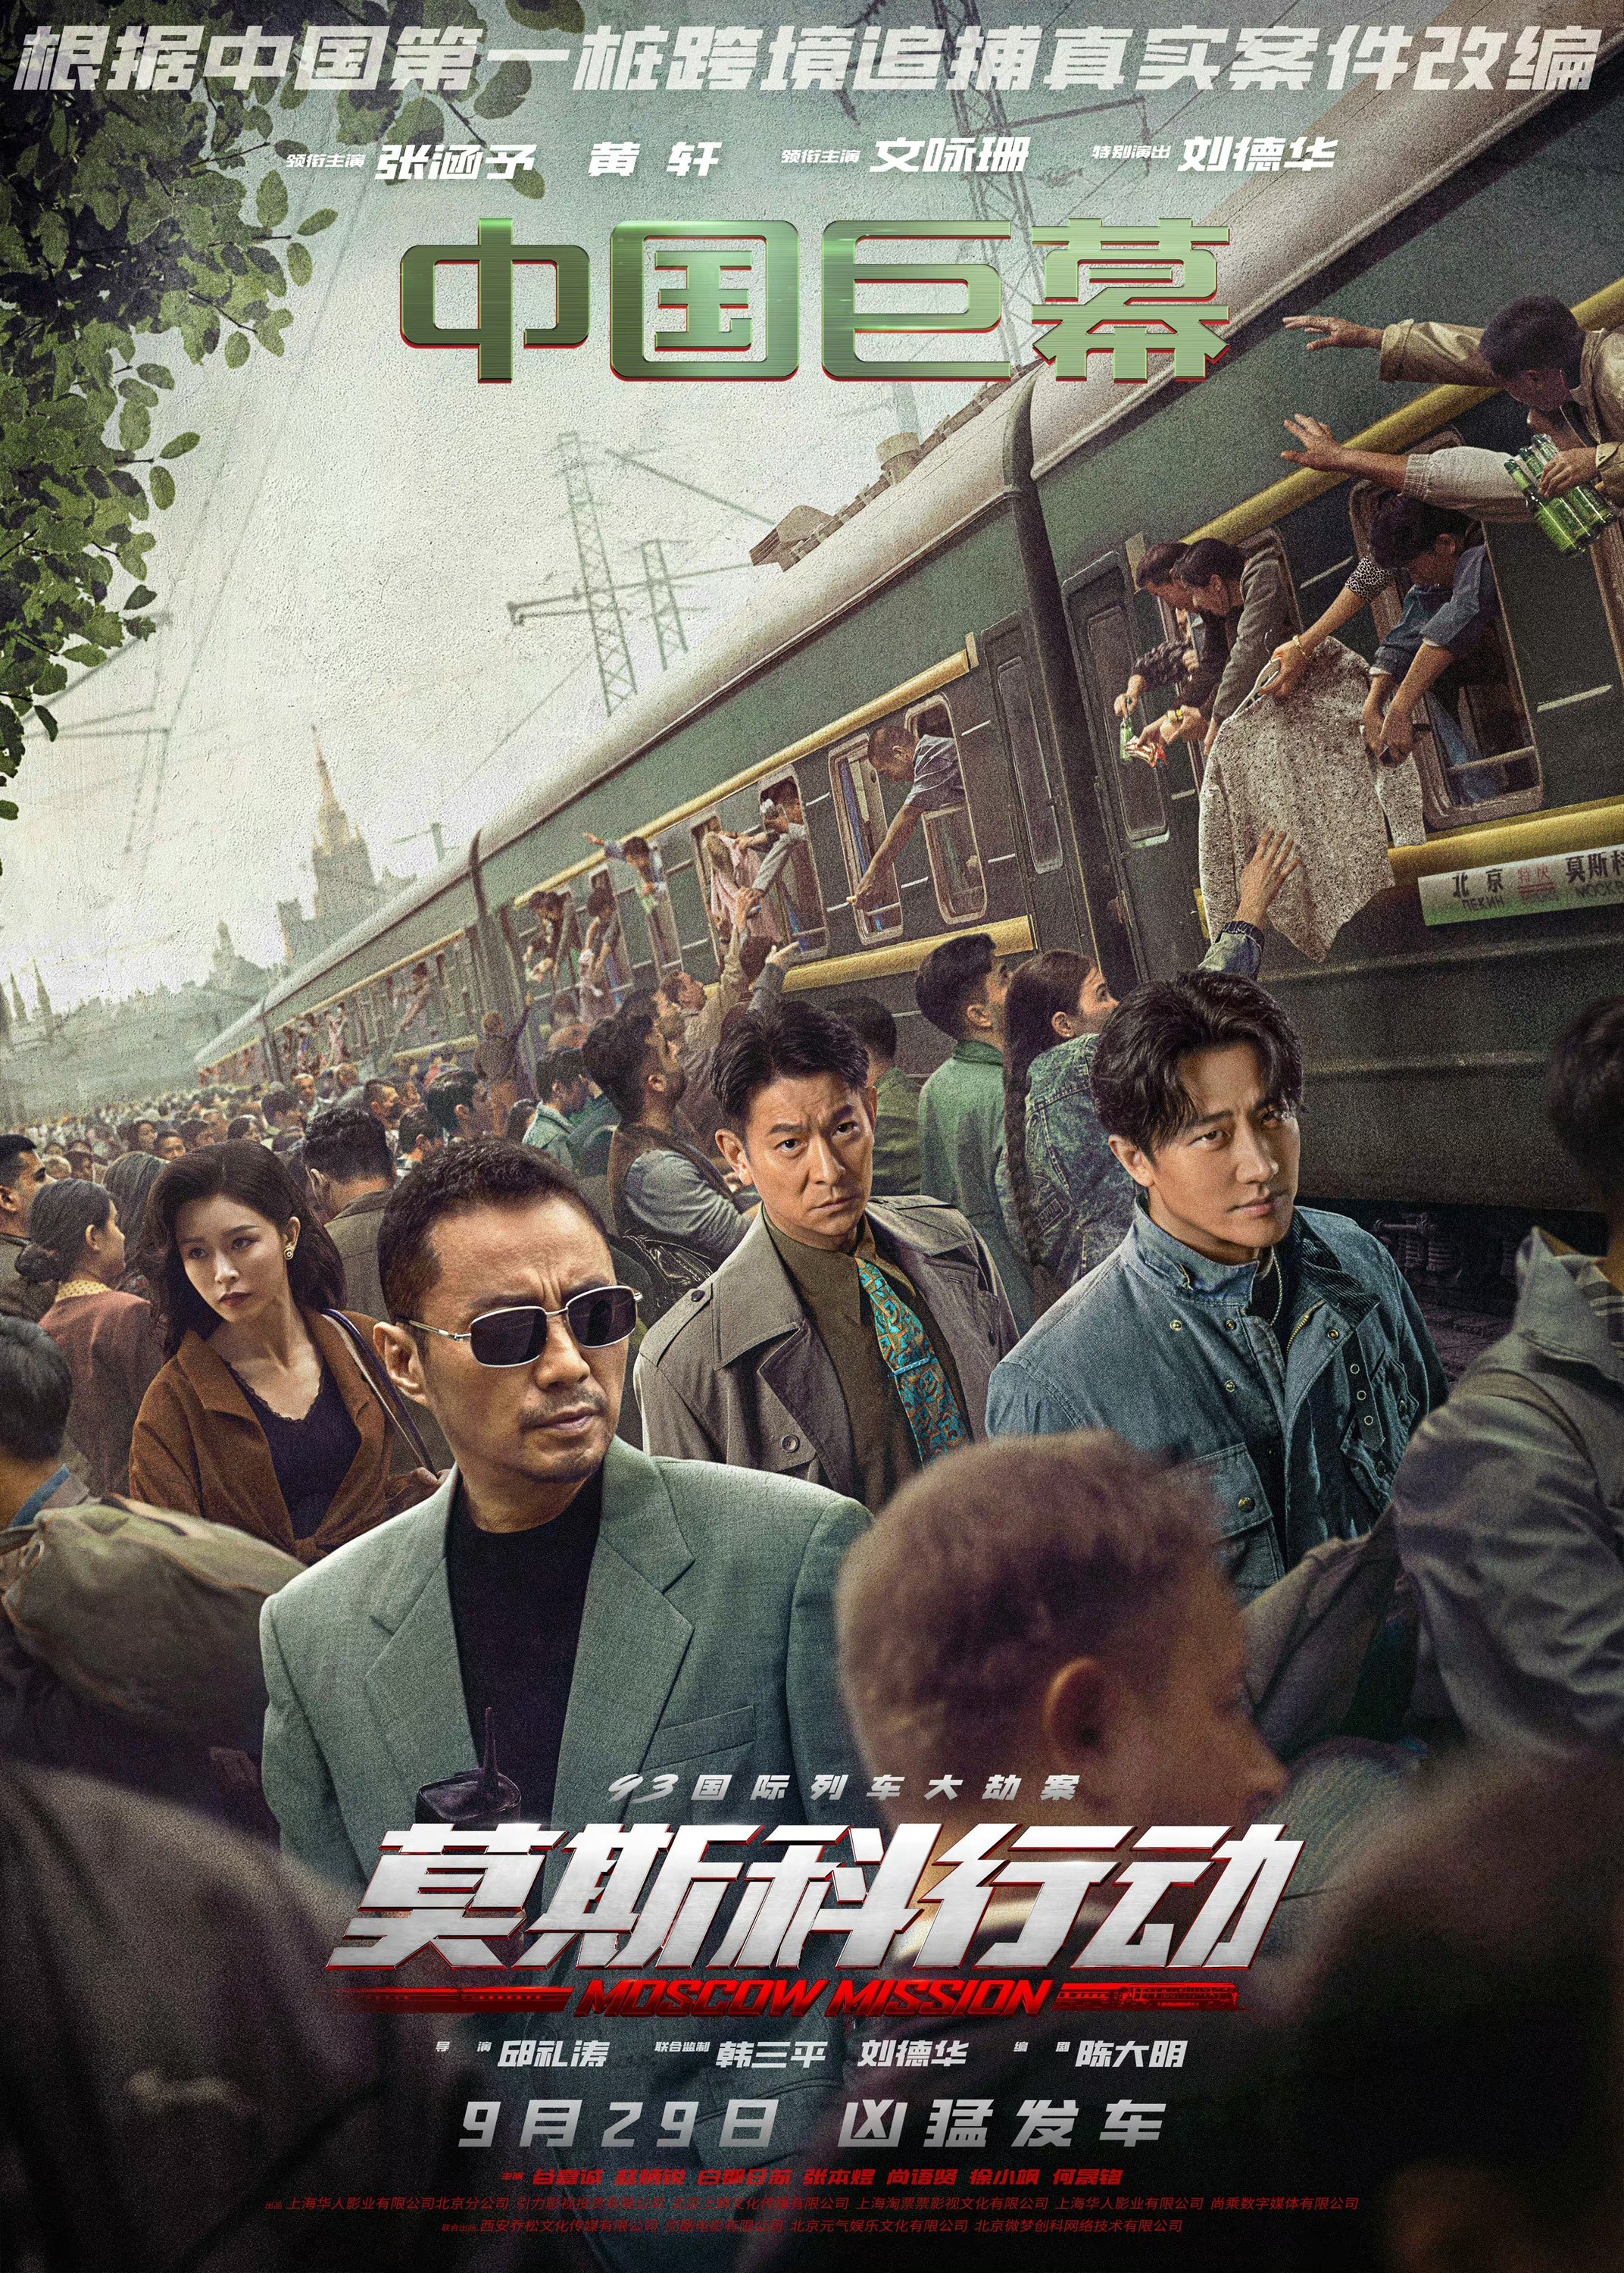 Mega Sized Movie Poster Image for Mosike xingdong (#4 of 8)